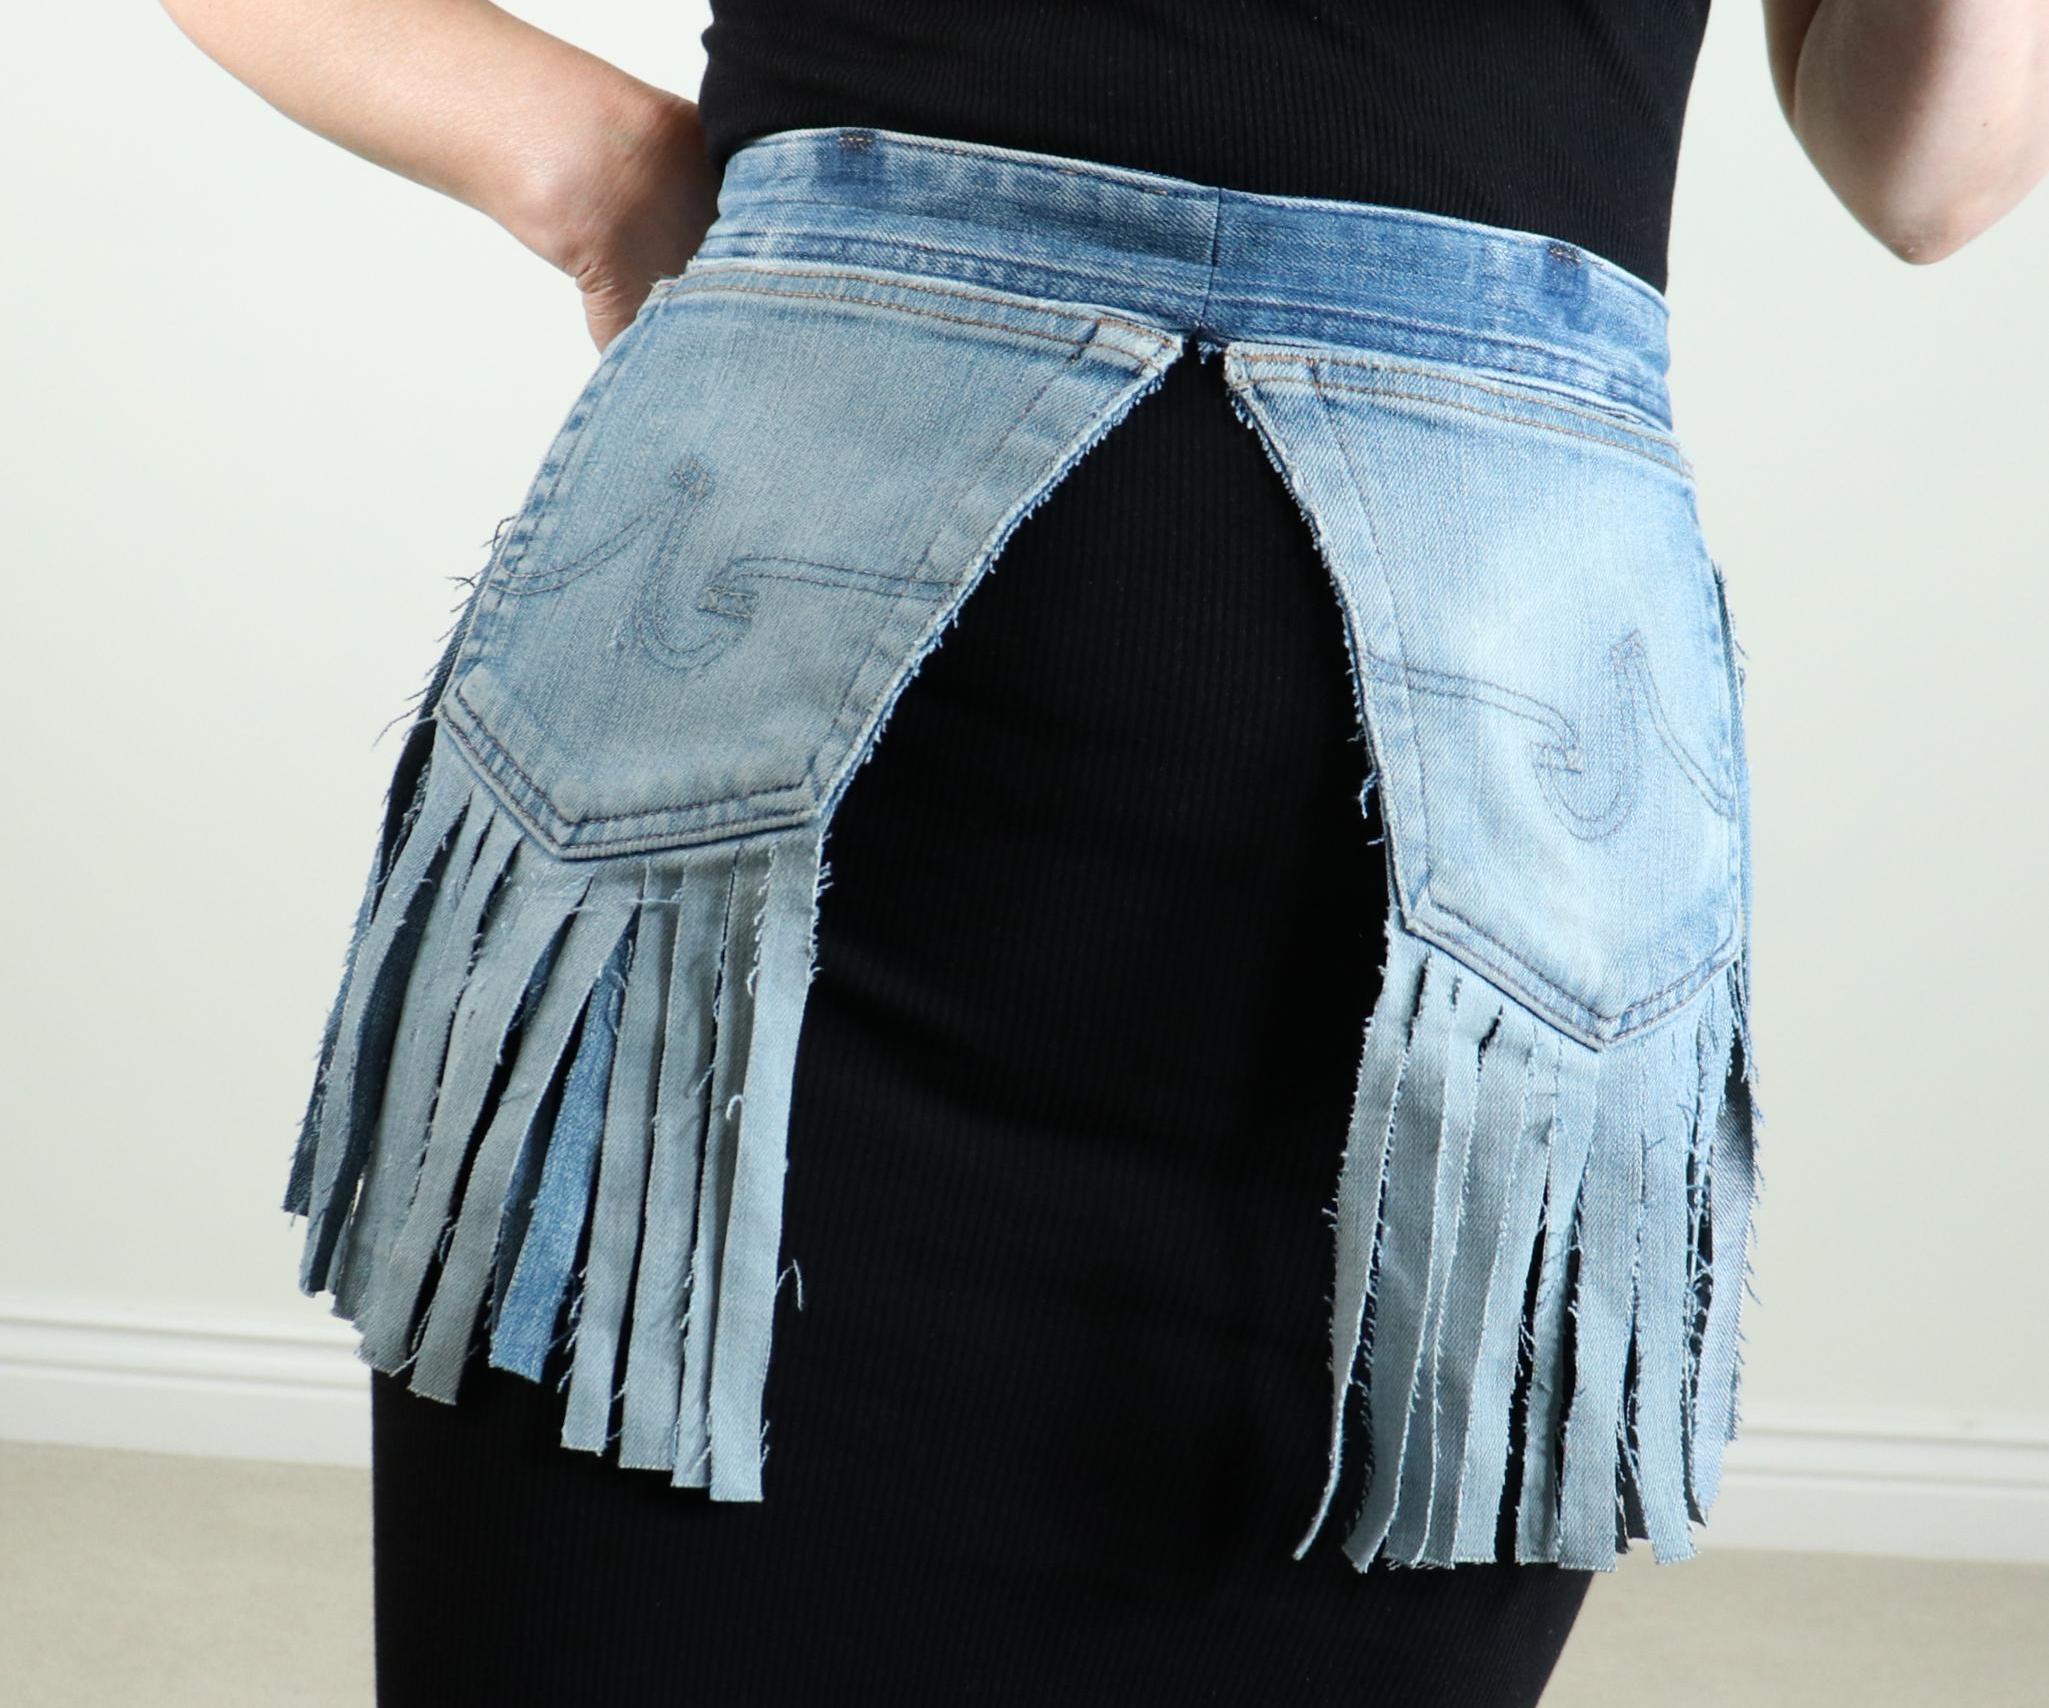 Make Denim Belts With Pockets With Your Old Jeans